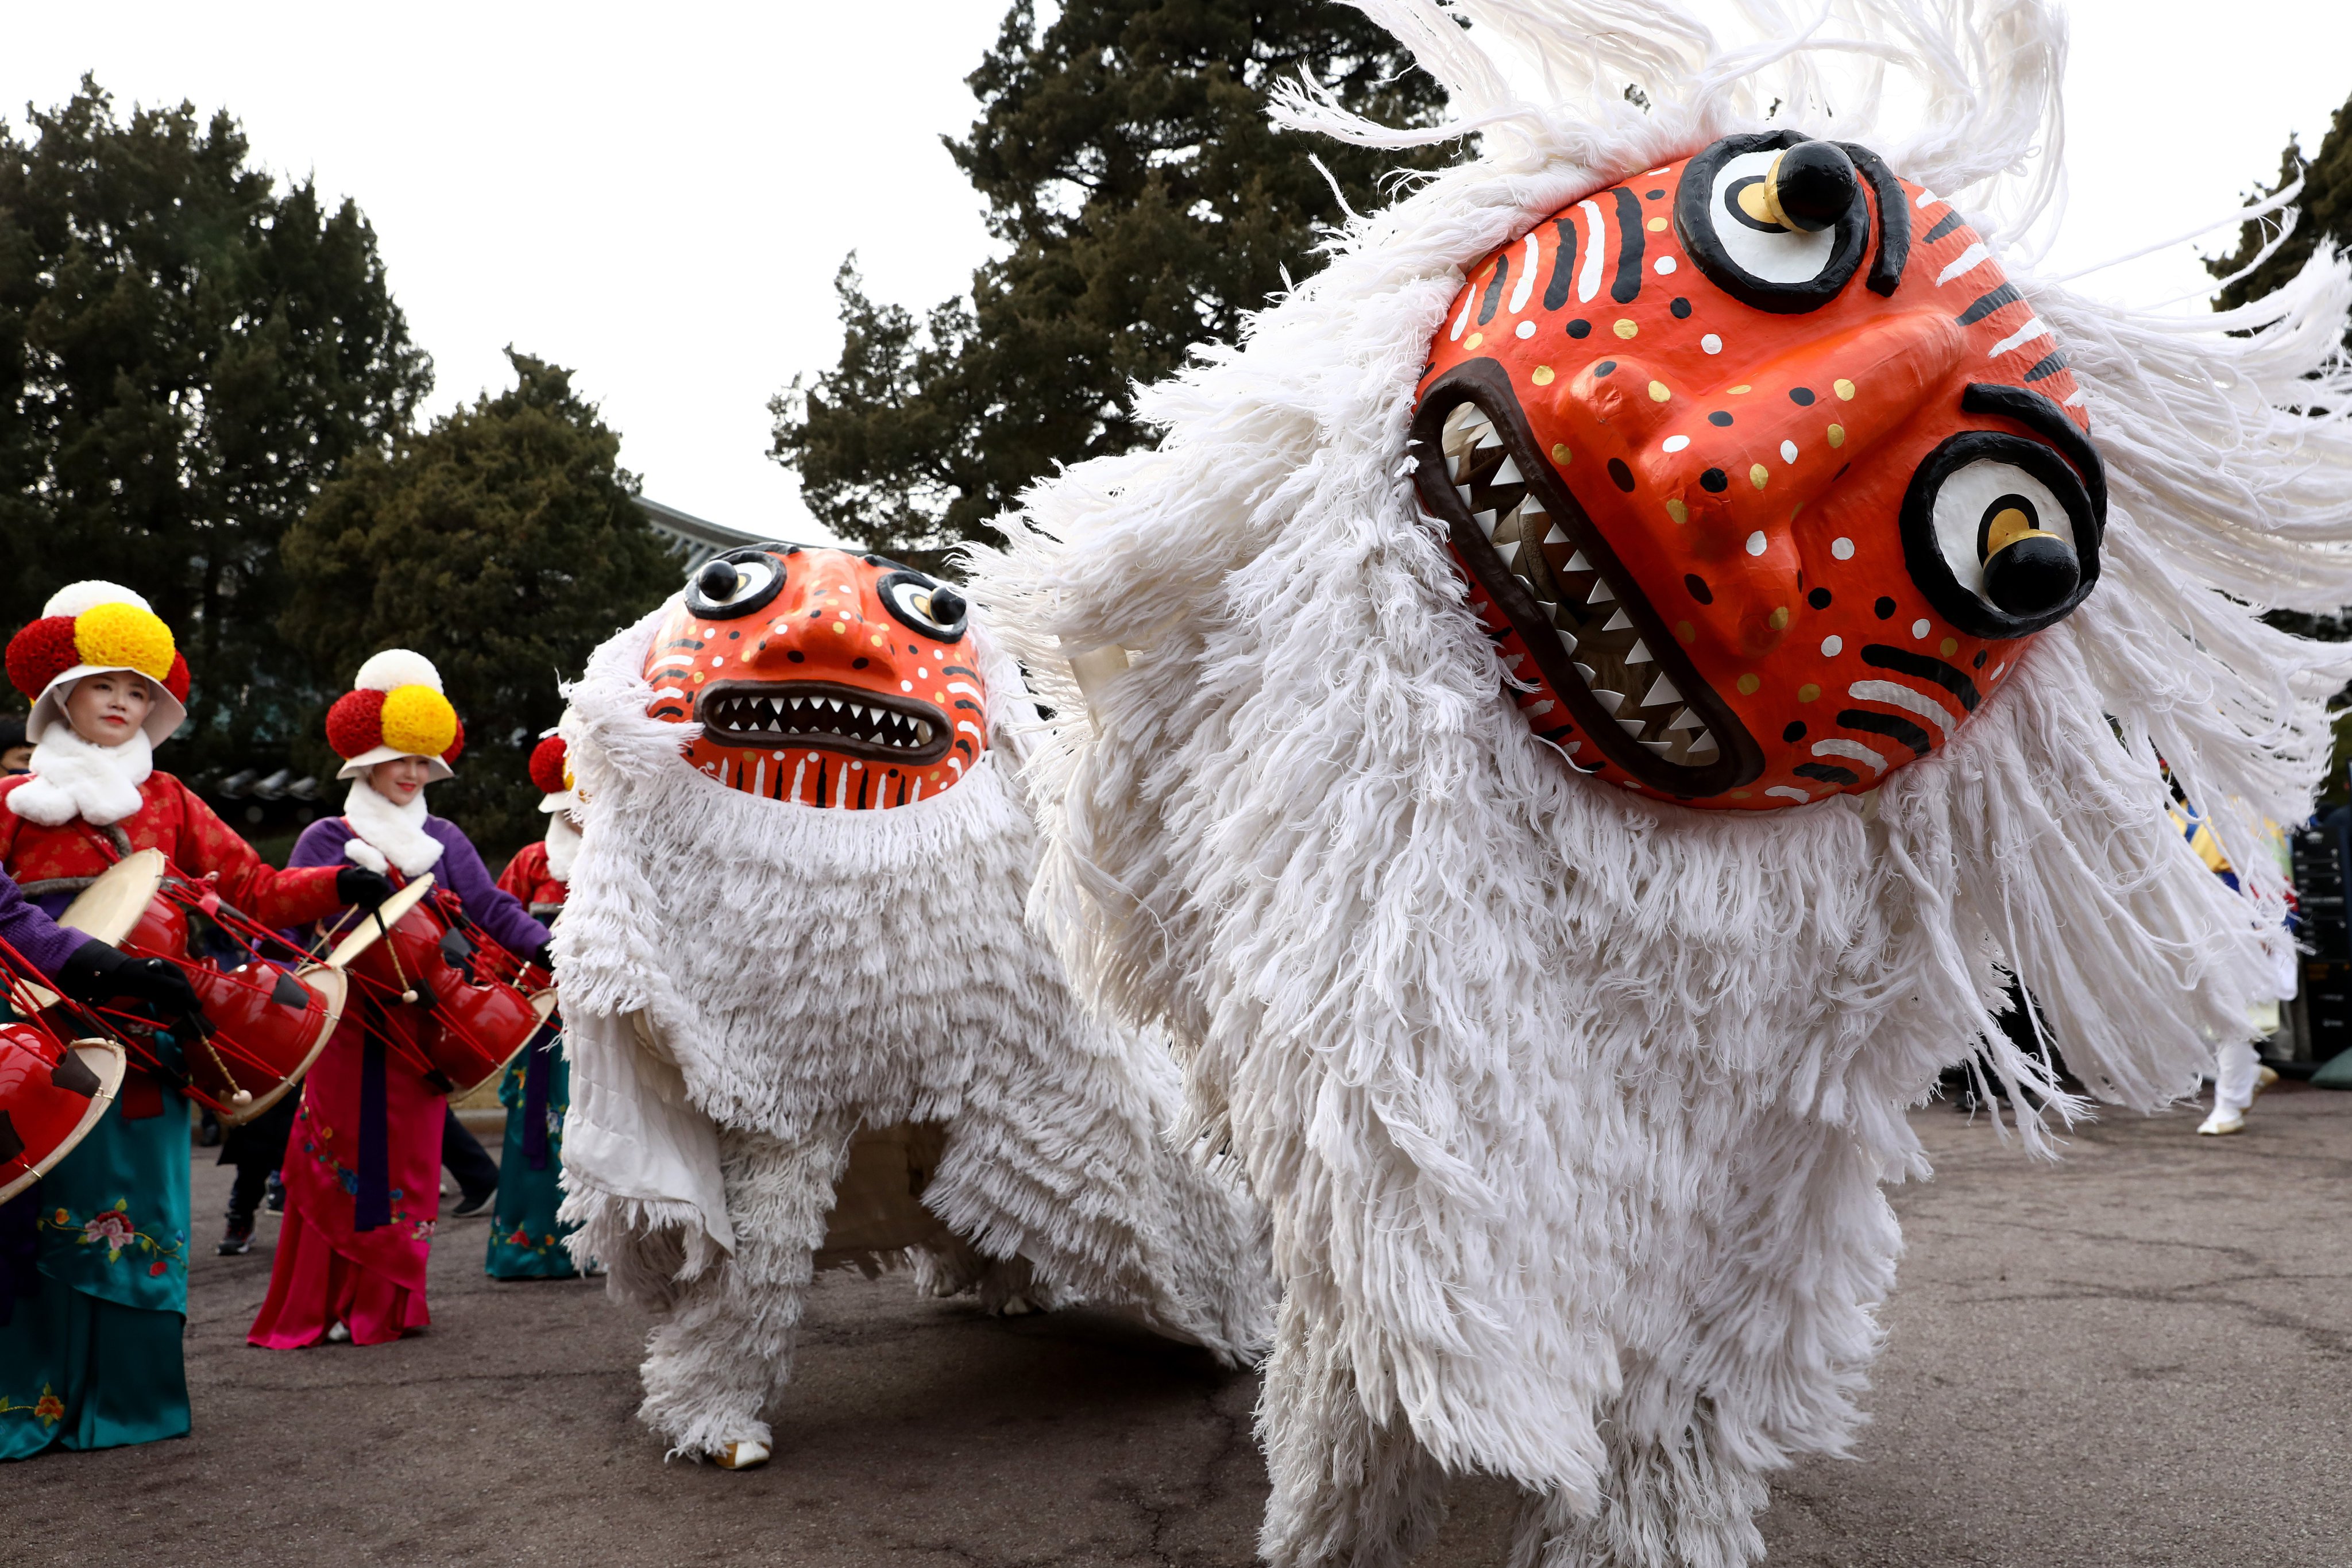 South Korean performers participate in a Lunar New Year event at the Blue House, the former South Korean presidential palace, in Seoul, on January 22, 2023. Or should that be Chinese New Year? Photo: Getty Images